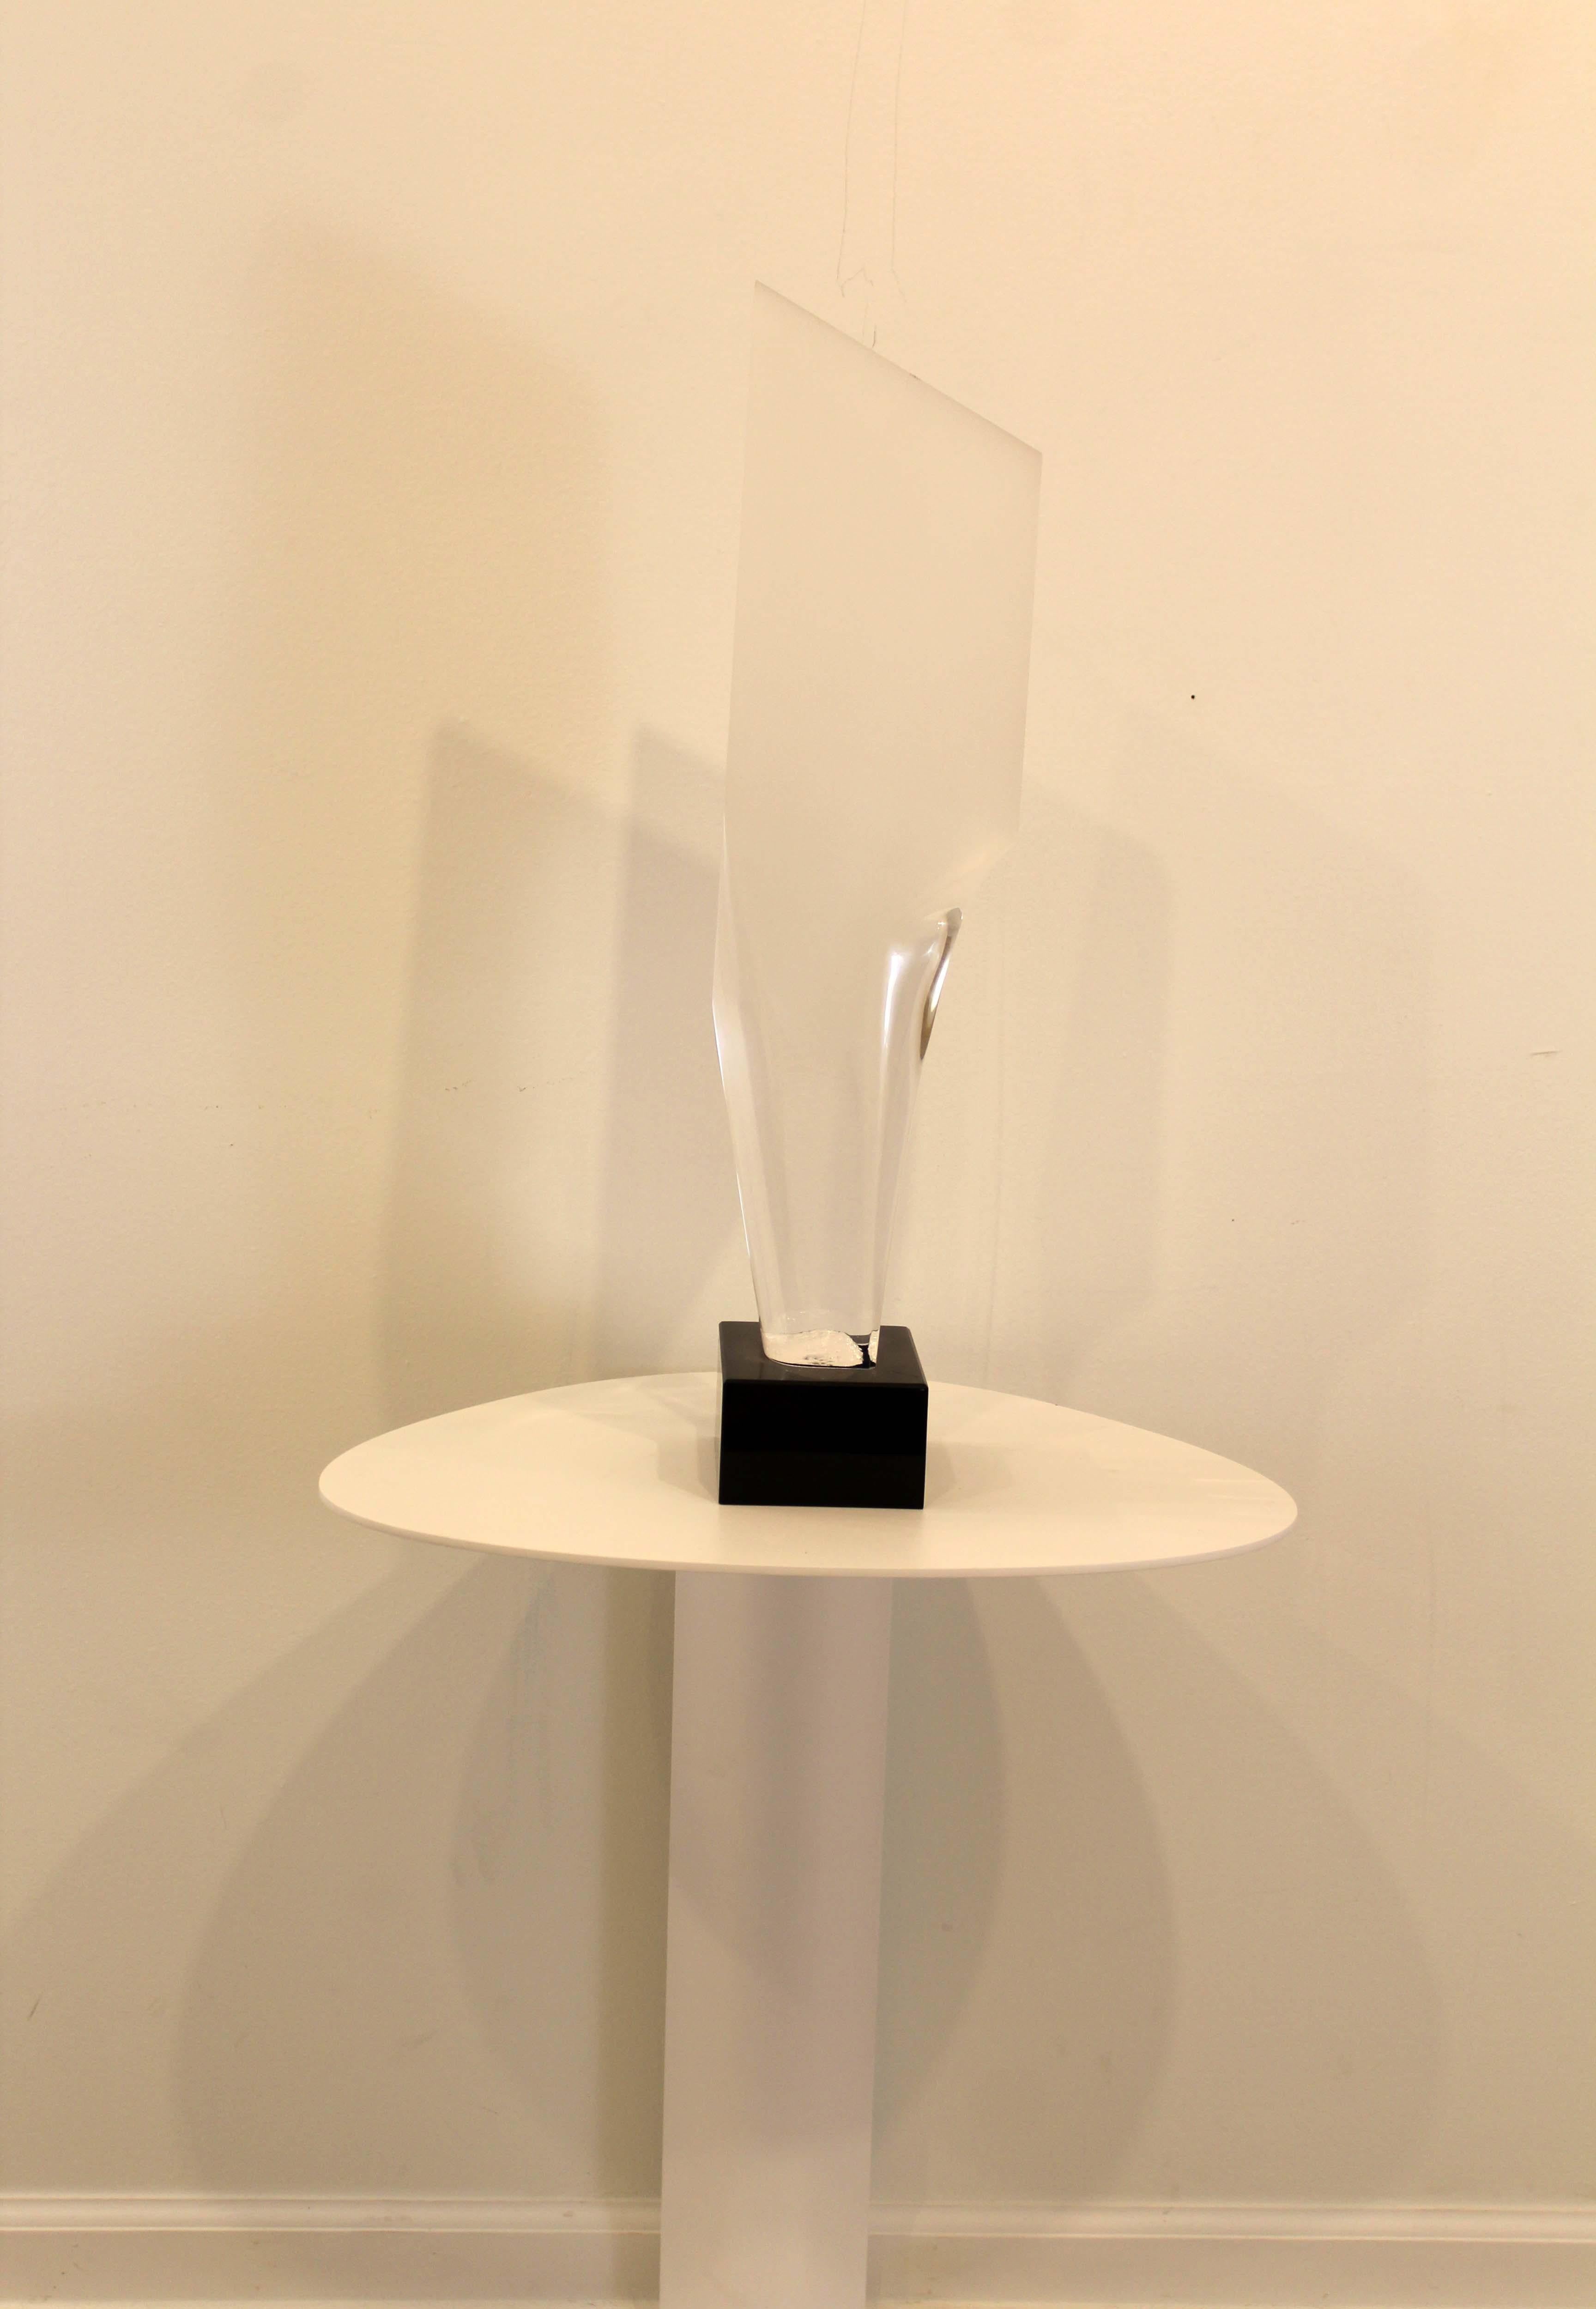 A stunning modern statement piece, a large lucite sculpture titled Chisel 33 by Detroit sculptor James Nani. Dated 1993. Dimensions: 23.25 H x 5 D x 6 W. In excellent vintage condition.

James Nani (1926-2016) was a Detroit artist for over 50